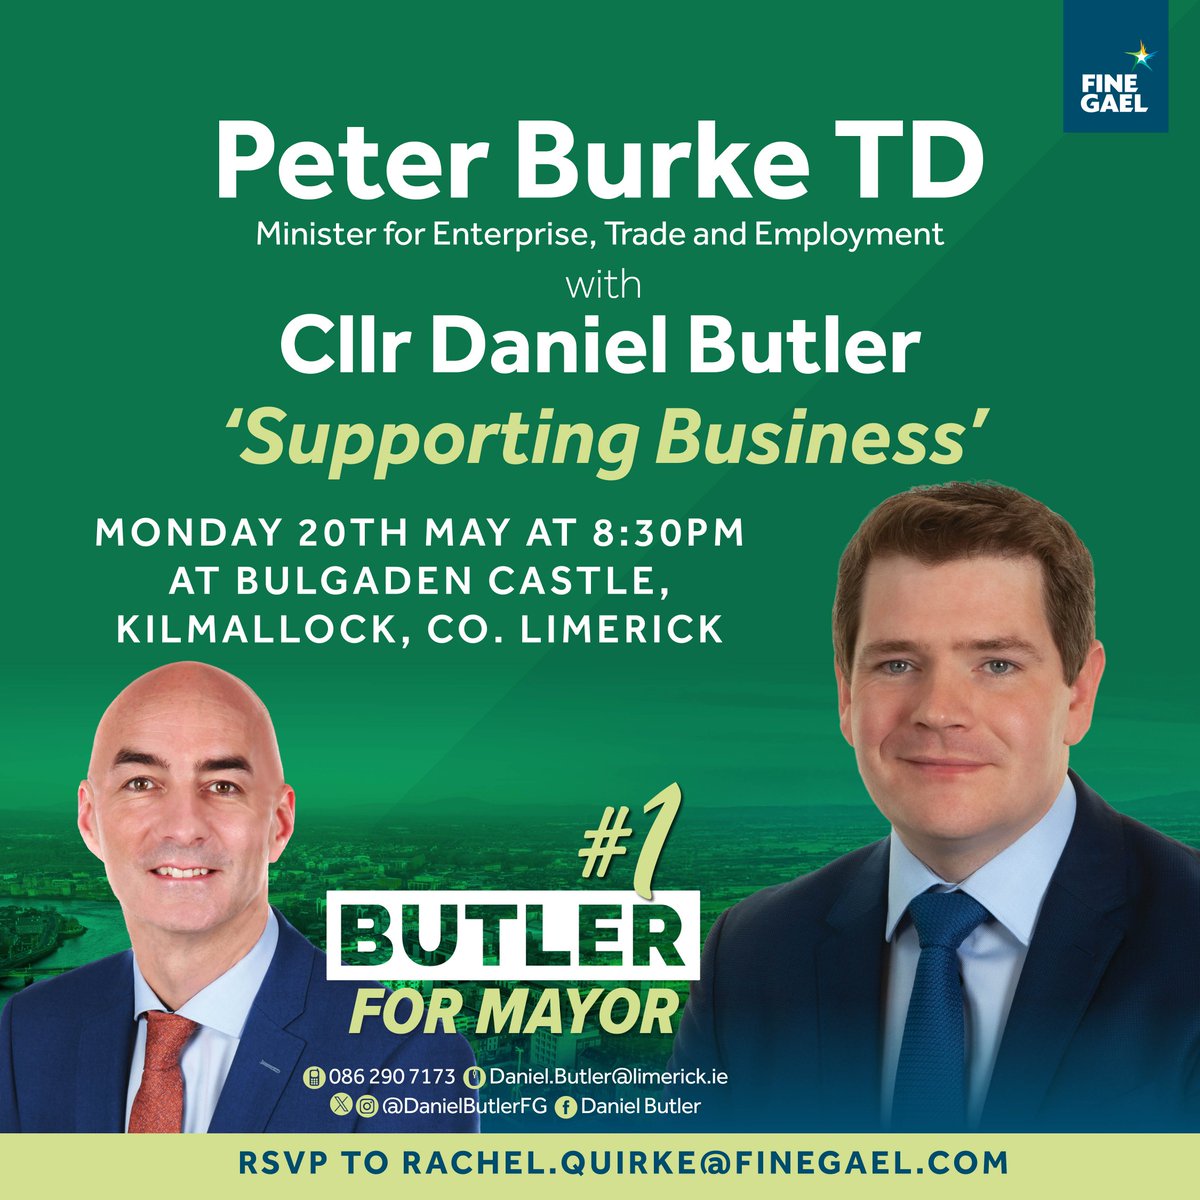 I will be joined by Minister @peterburkefg next Monday at 8.30pm in Bulgaden Castle, Kilmallock to talk about Backing Business in Limerick. Looking forward to seeing you there! #ButlerBackingBusiness #ButlerForMayor #LimerickMayor